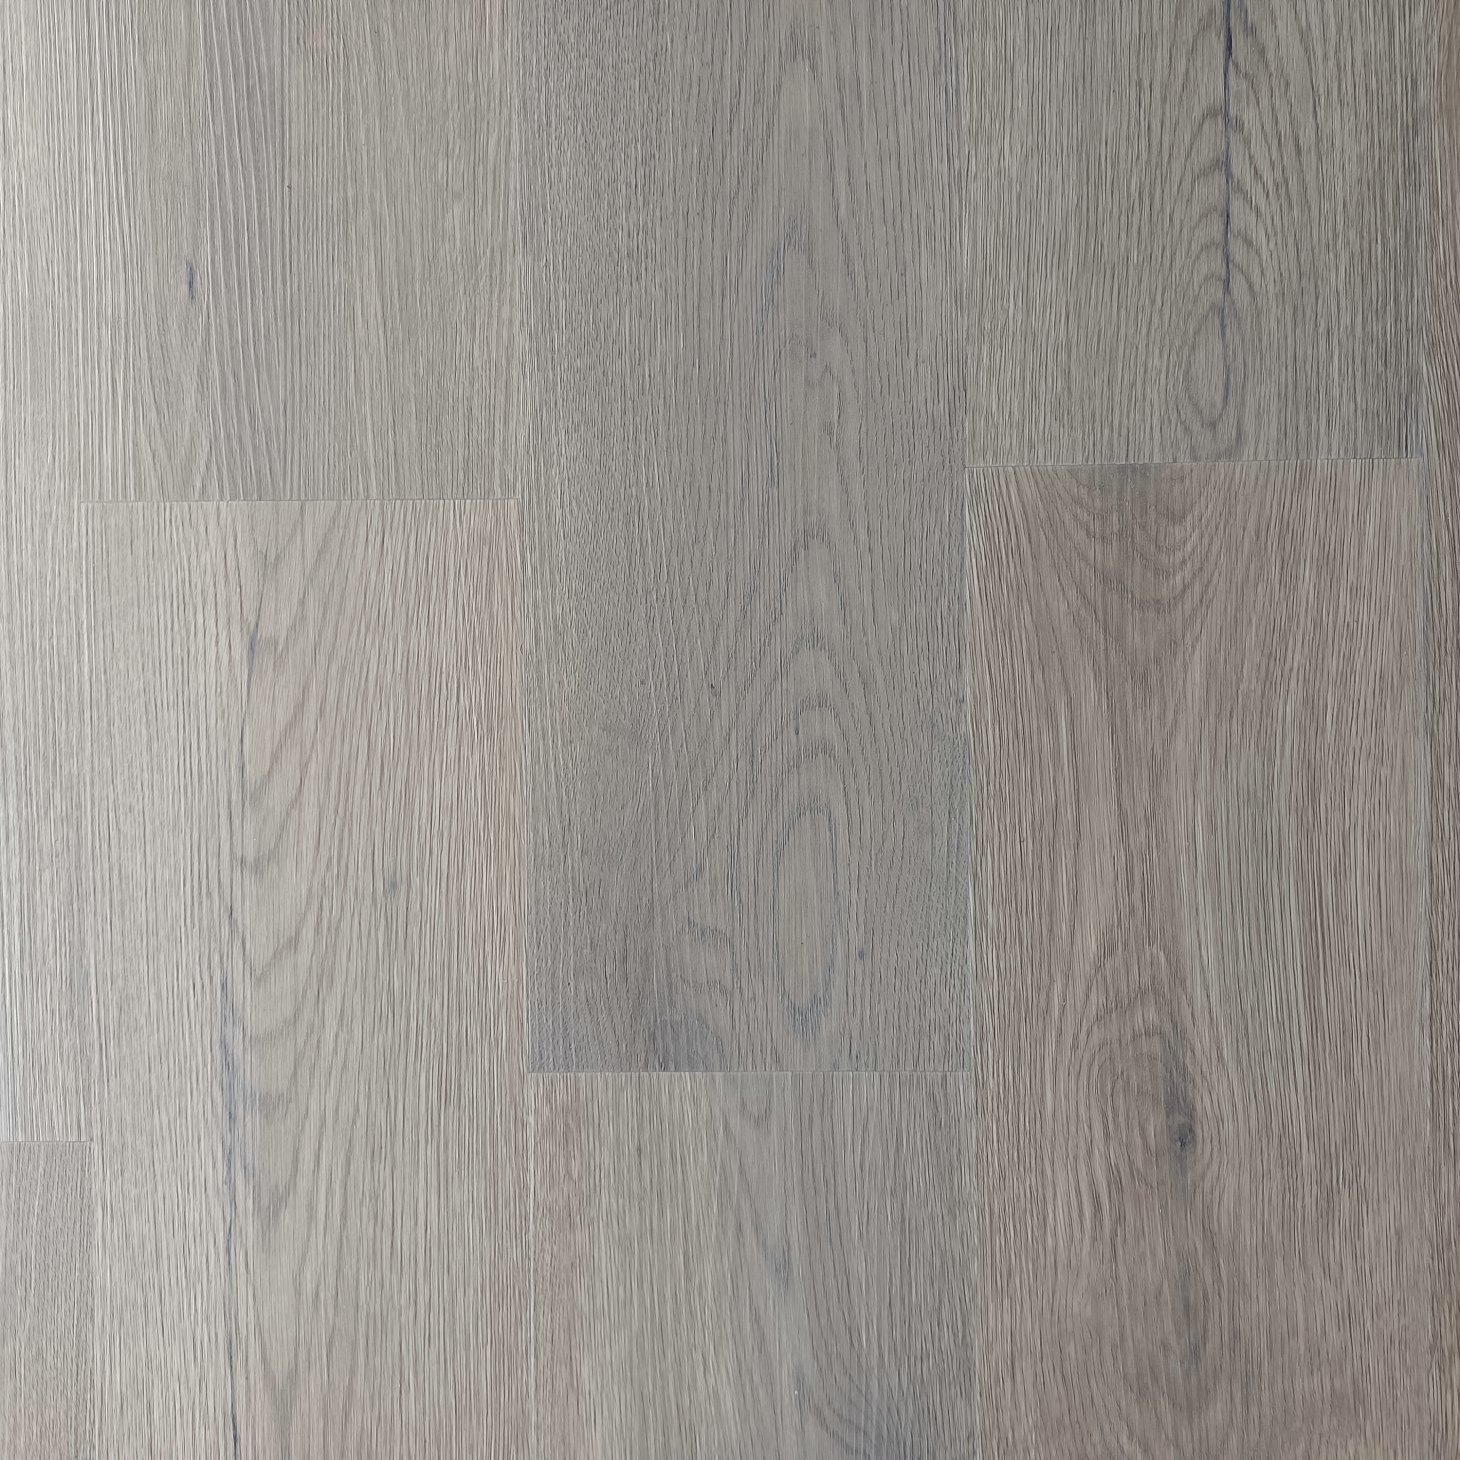 Special Price for Limewash Timber -
 Stable structure ABA luxury rigid spc flooring from Kangton – Kangton